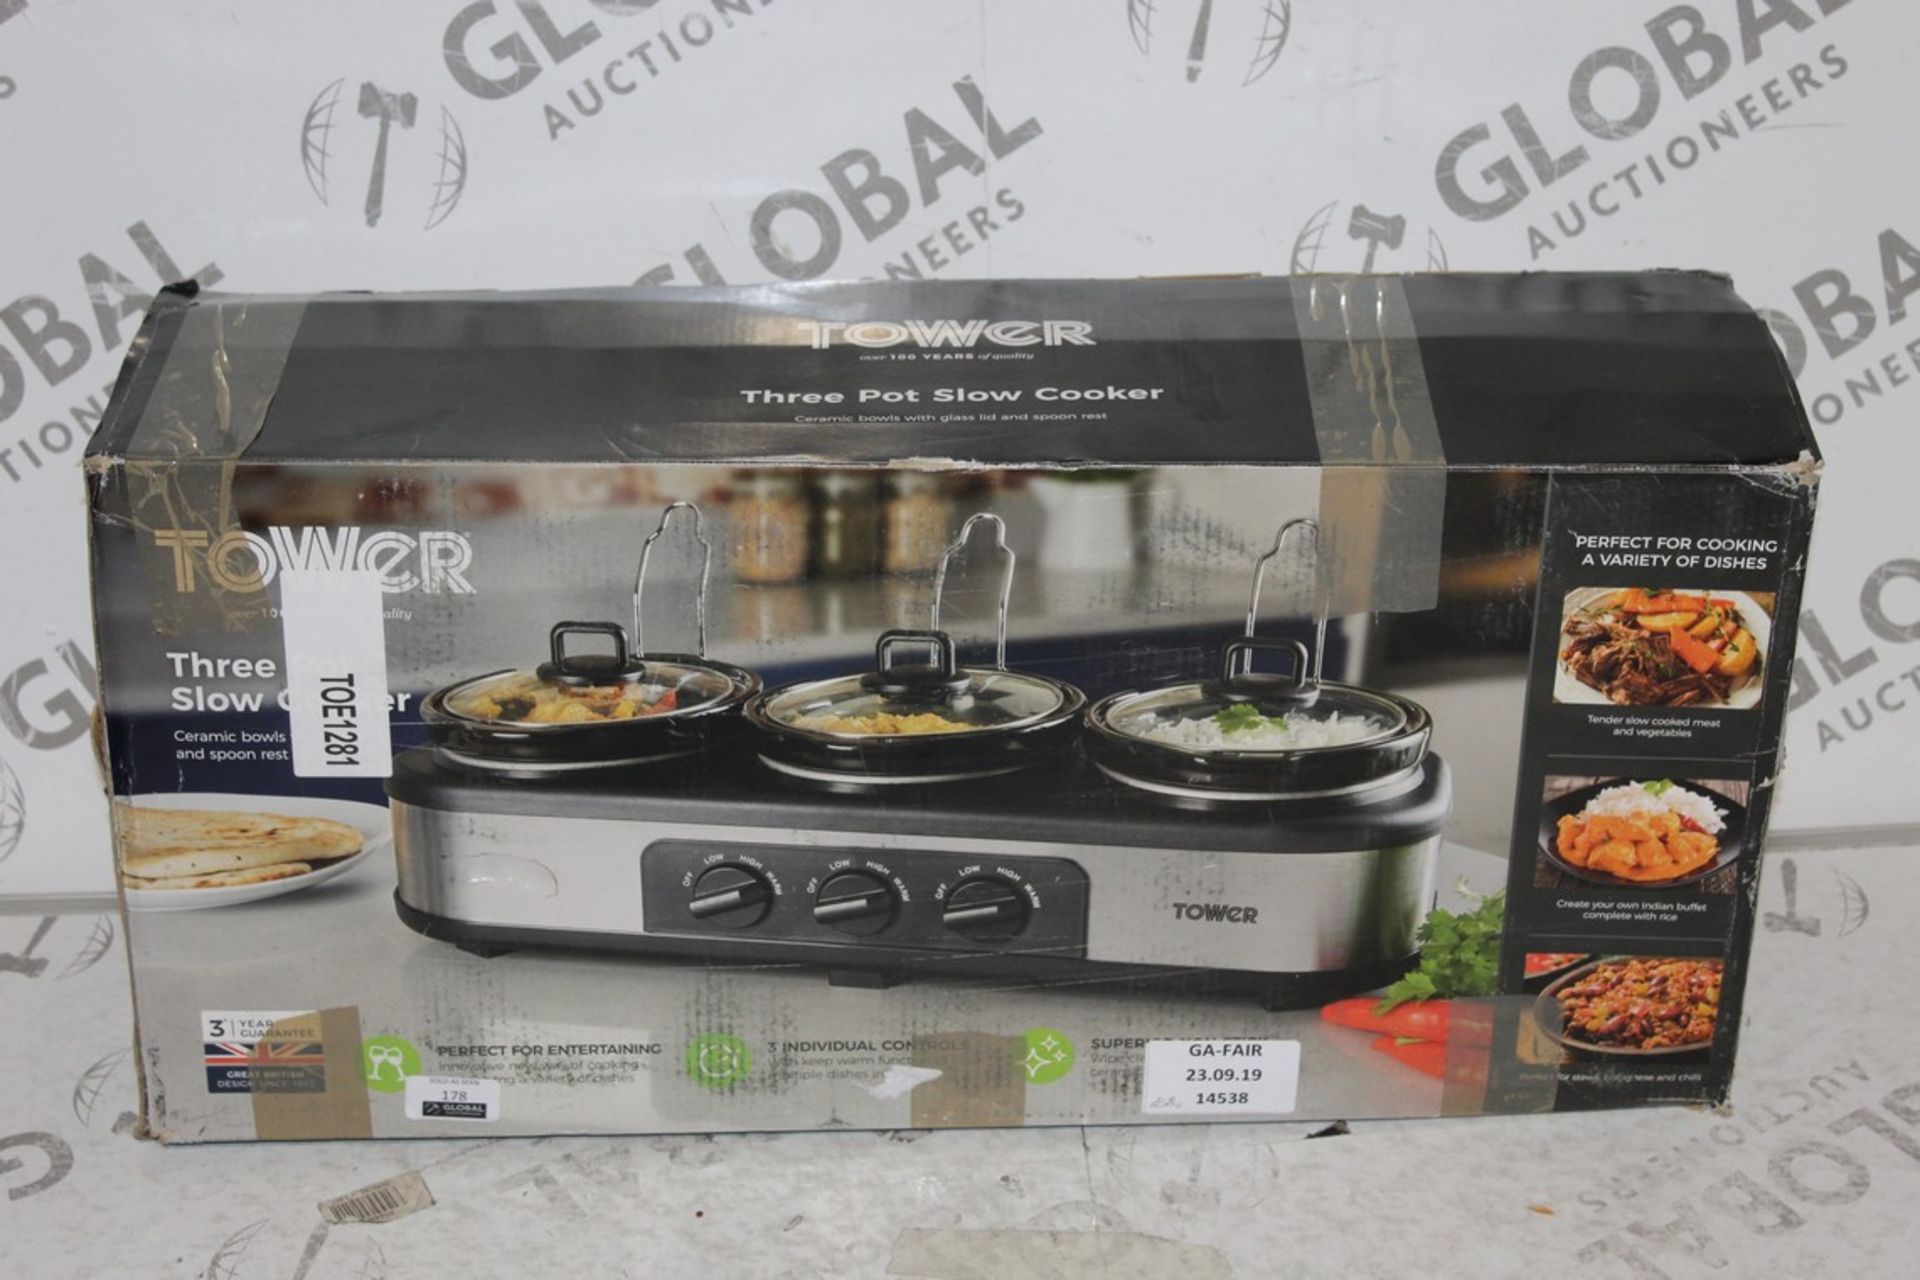 Boxed Tower 3 Compartment Slow Cooker RRP £60 (14538) (Public Viewing and Appraisals Available)